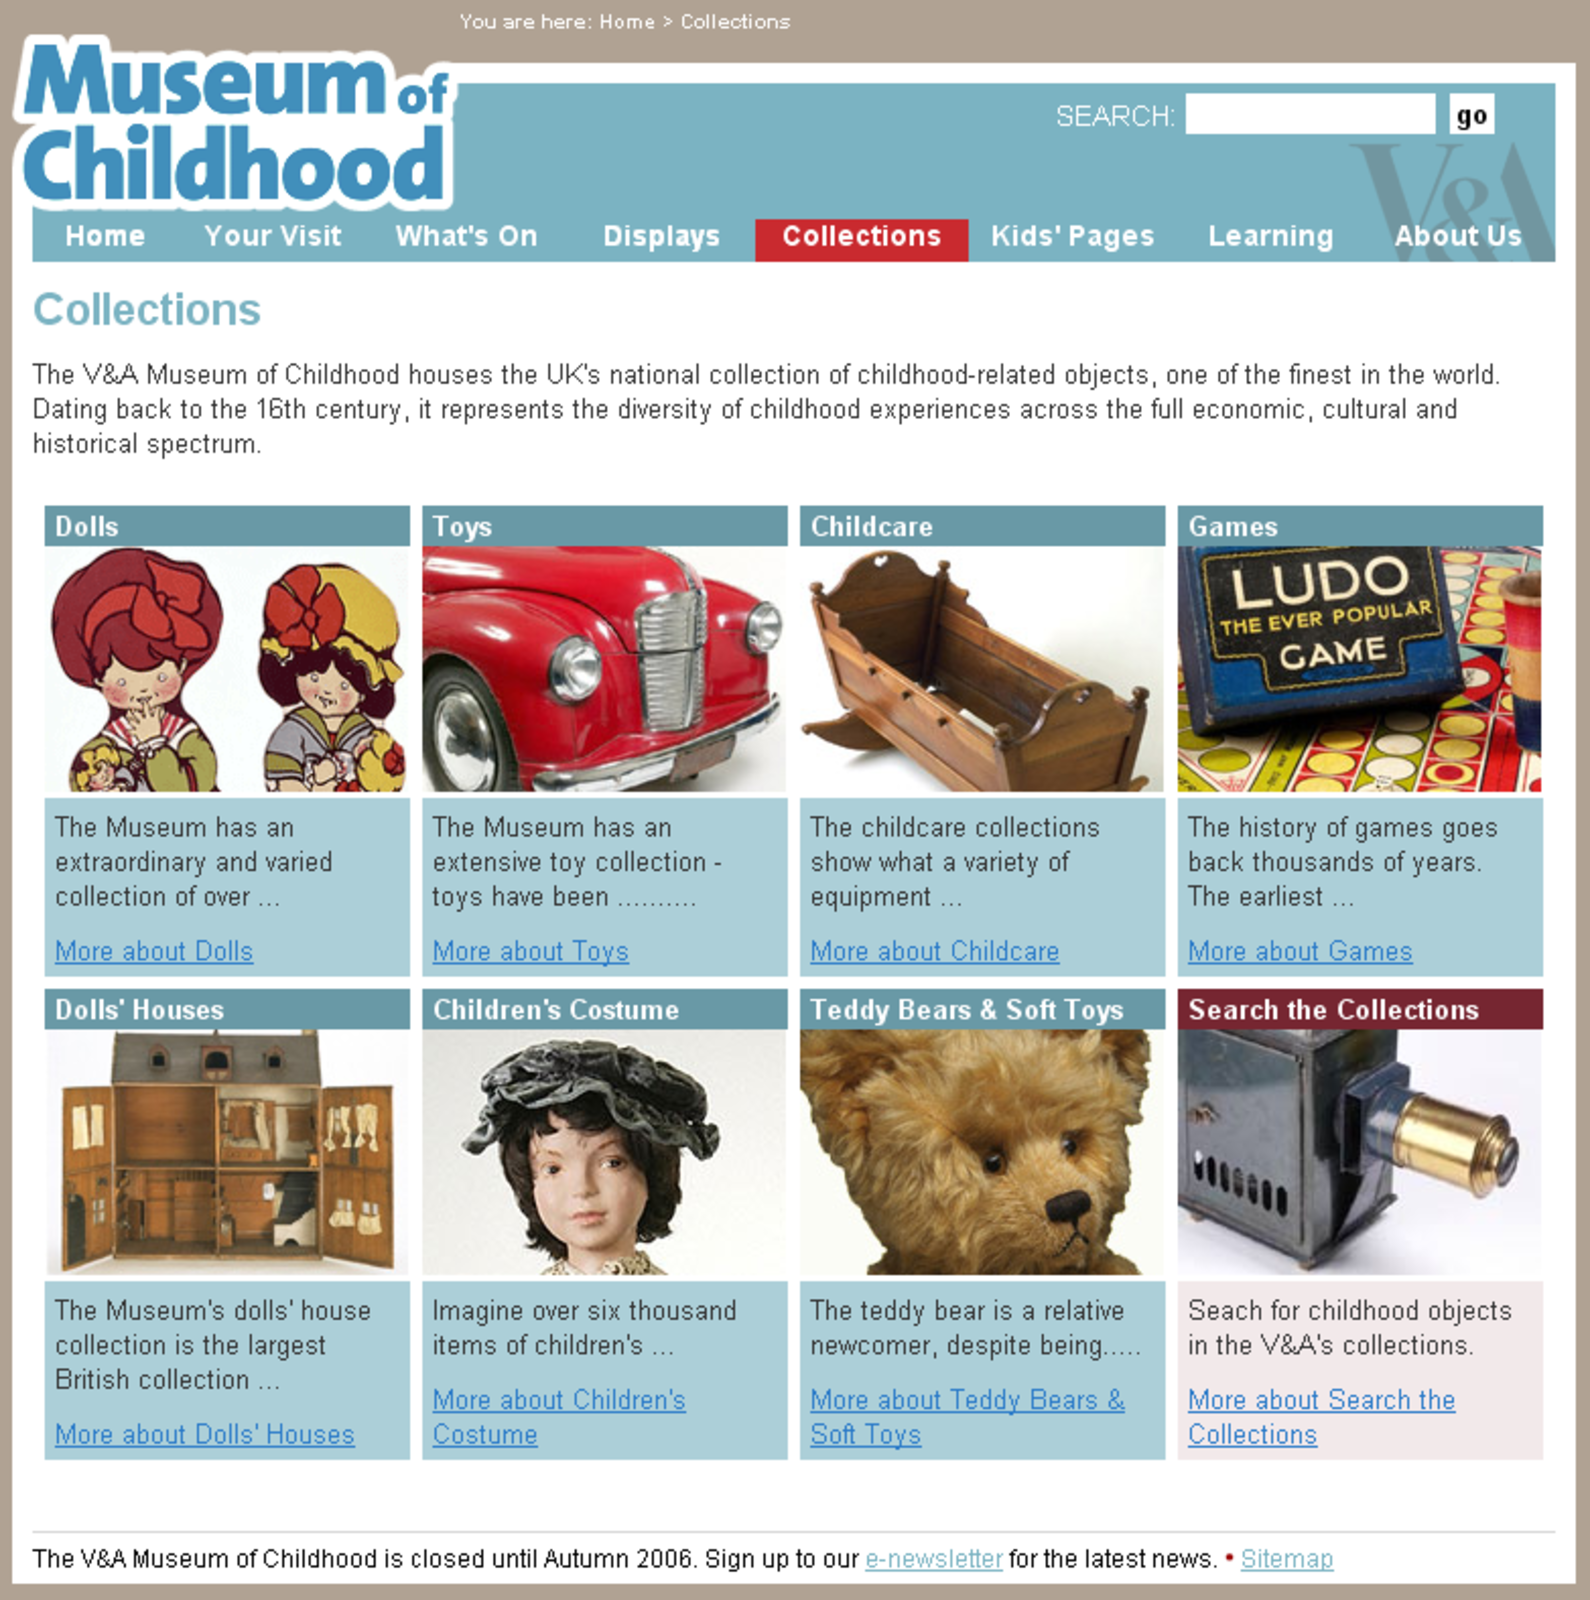 The Collections page from the Museum of Childhood site